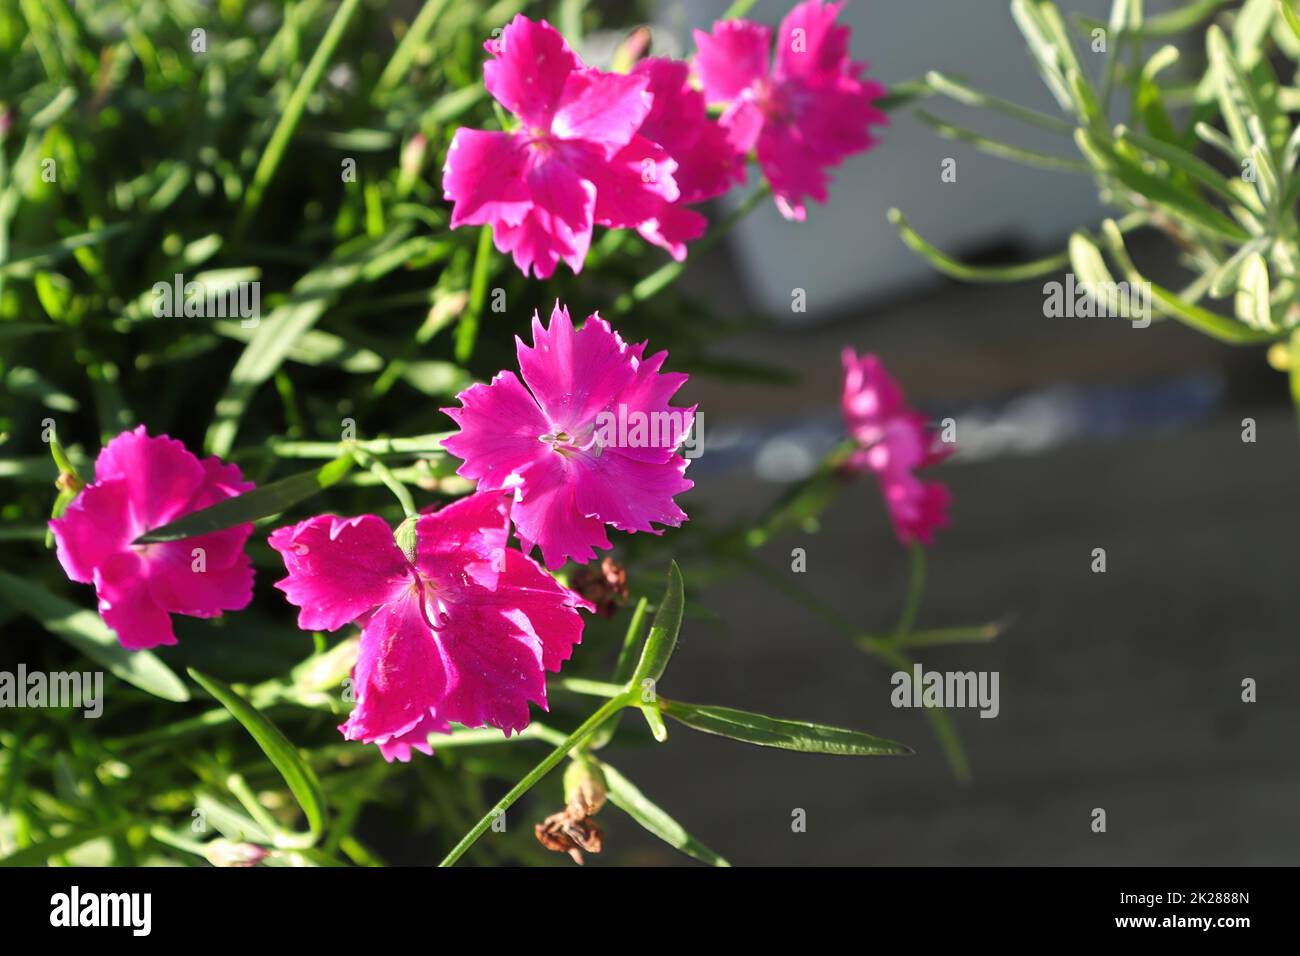 Closeup fo the pink flowers on a dianthus plant Stock Photo